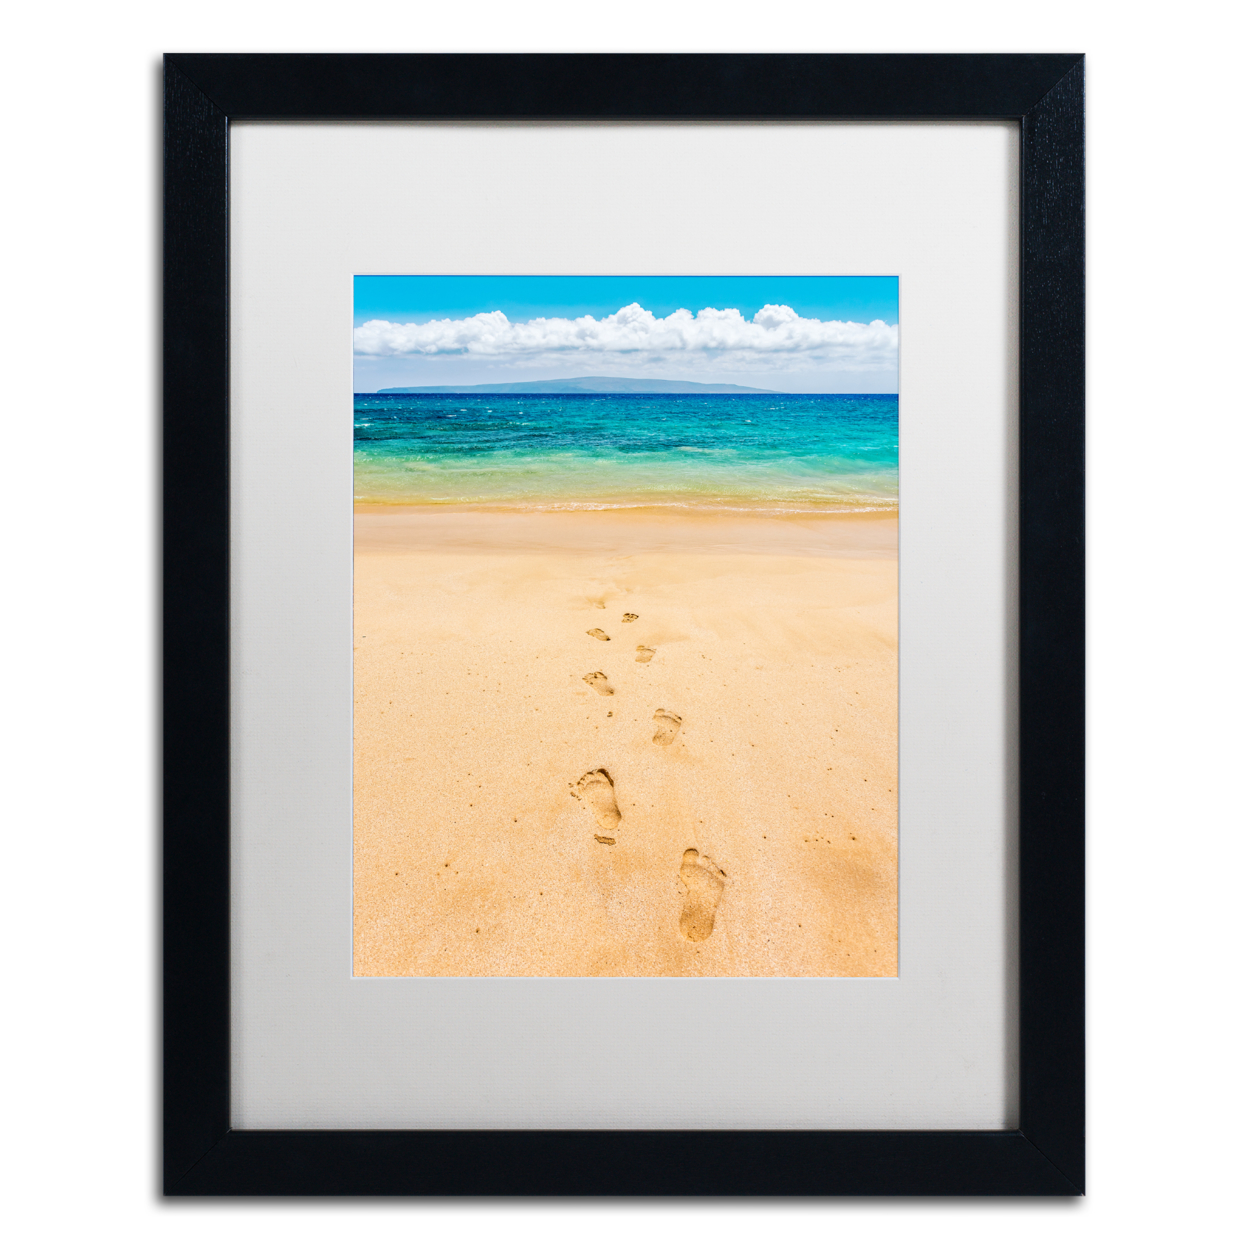 Pierre Leclerc 'Footprints In The Sand' Black Wooden Framed Art 18 X 22 Inches